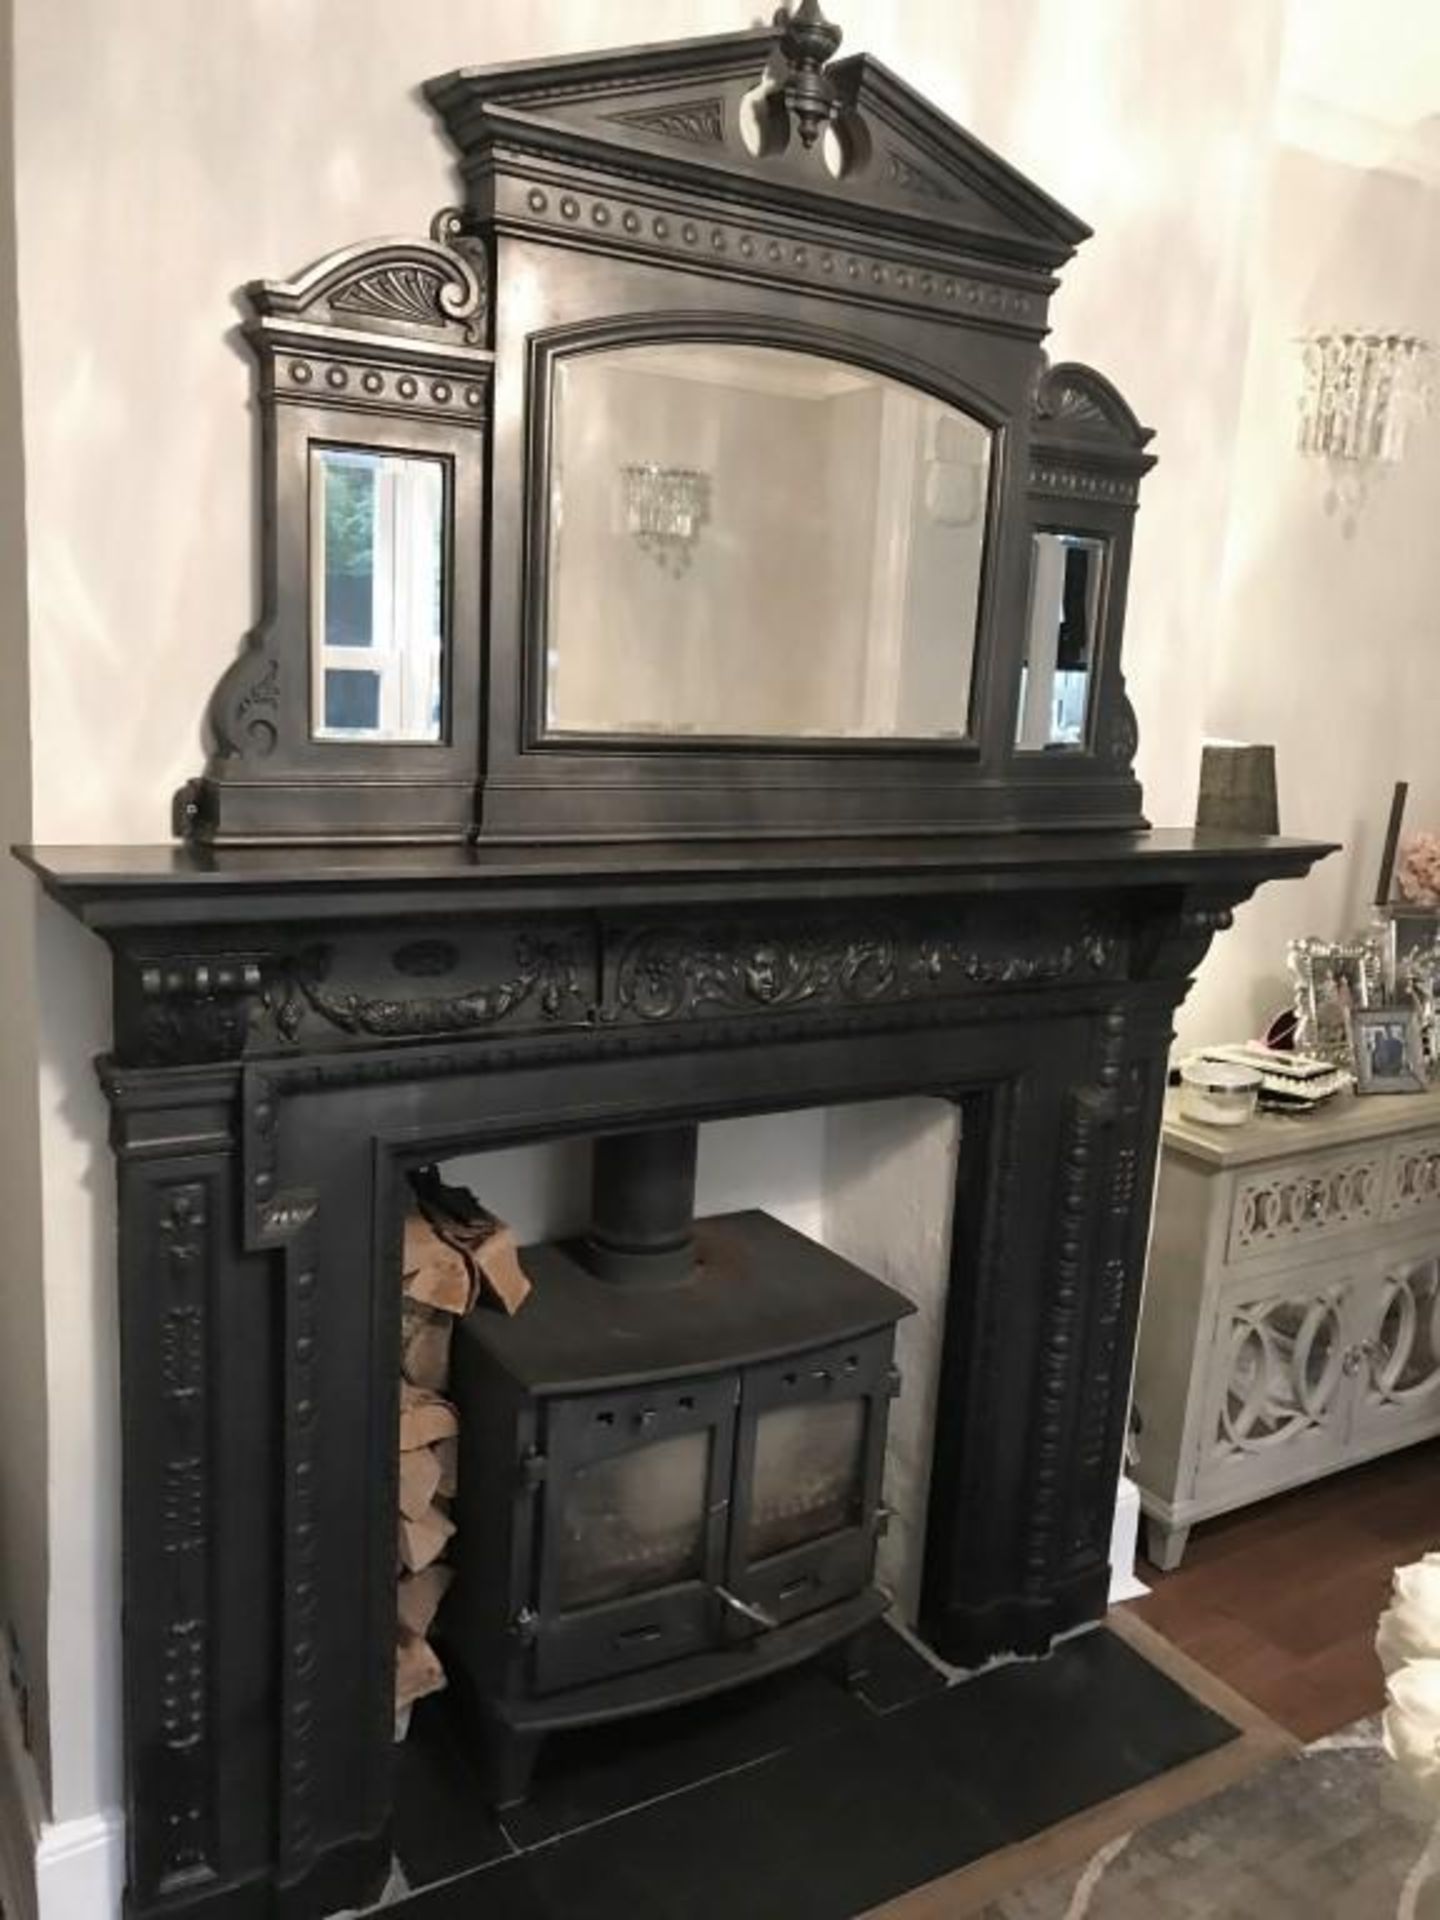 1 x Ultra Rare Stunningly Ornate Antique Victorian Cast Iron Fireplace, With Matching Cast Iron Mirr - Image 2 of 23